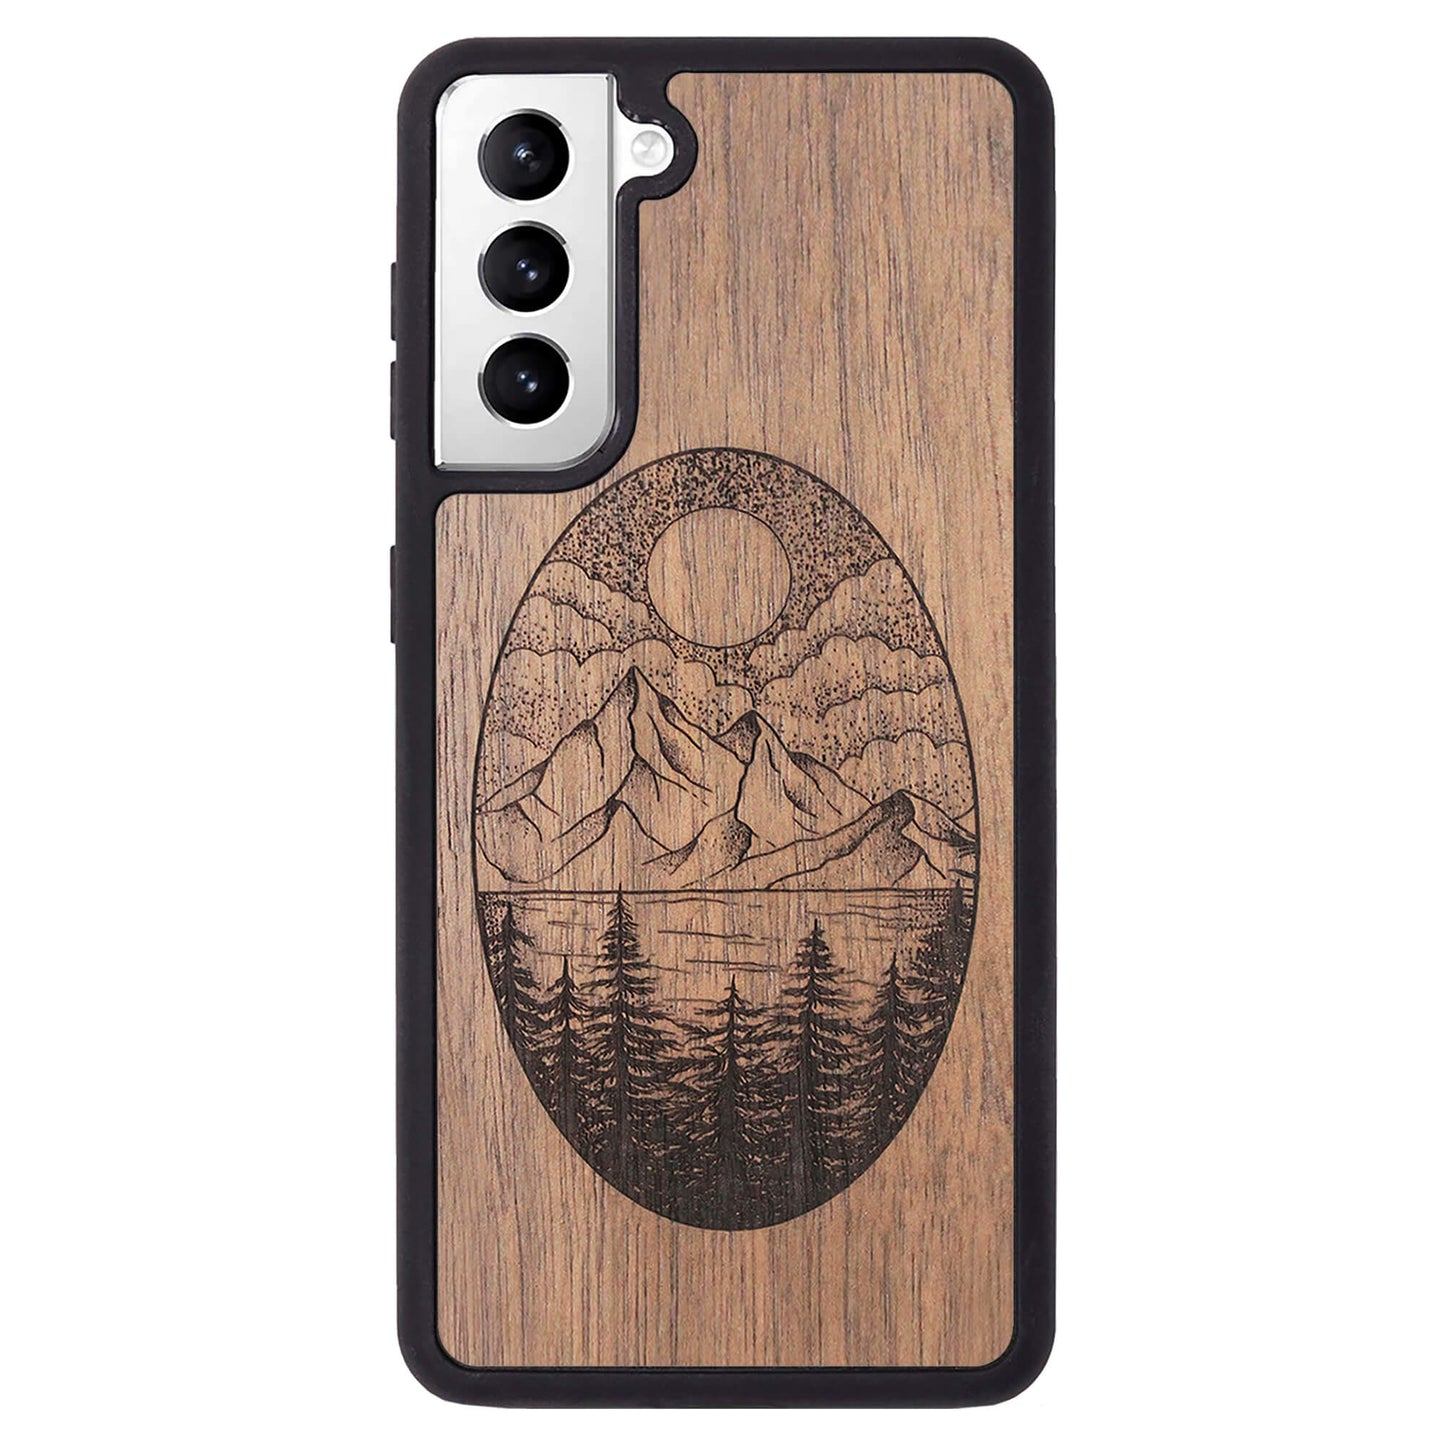 Wooden Case for Samsung Galaxy S21 Landscape